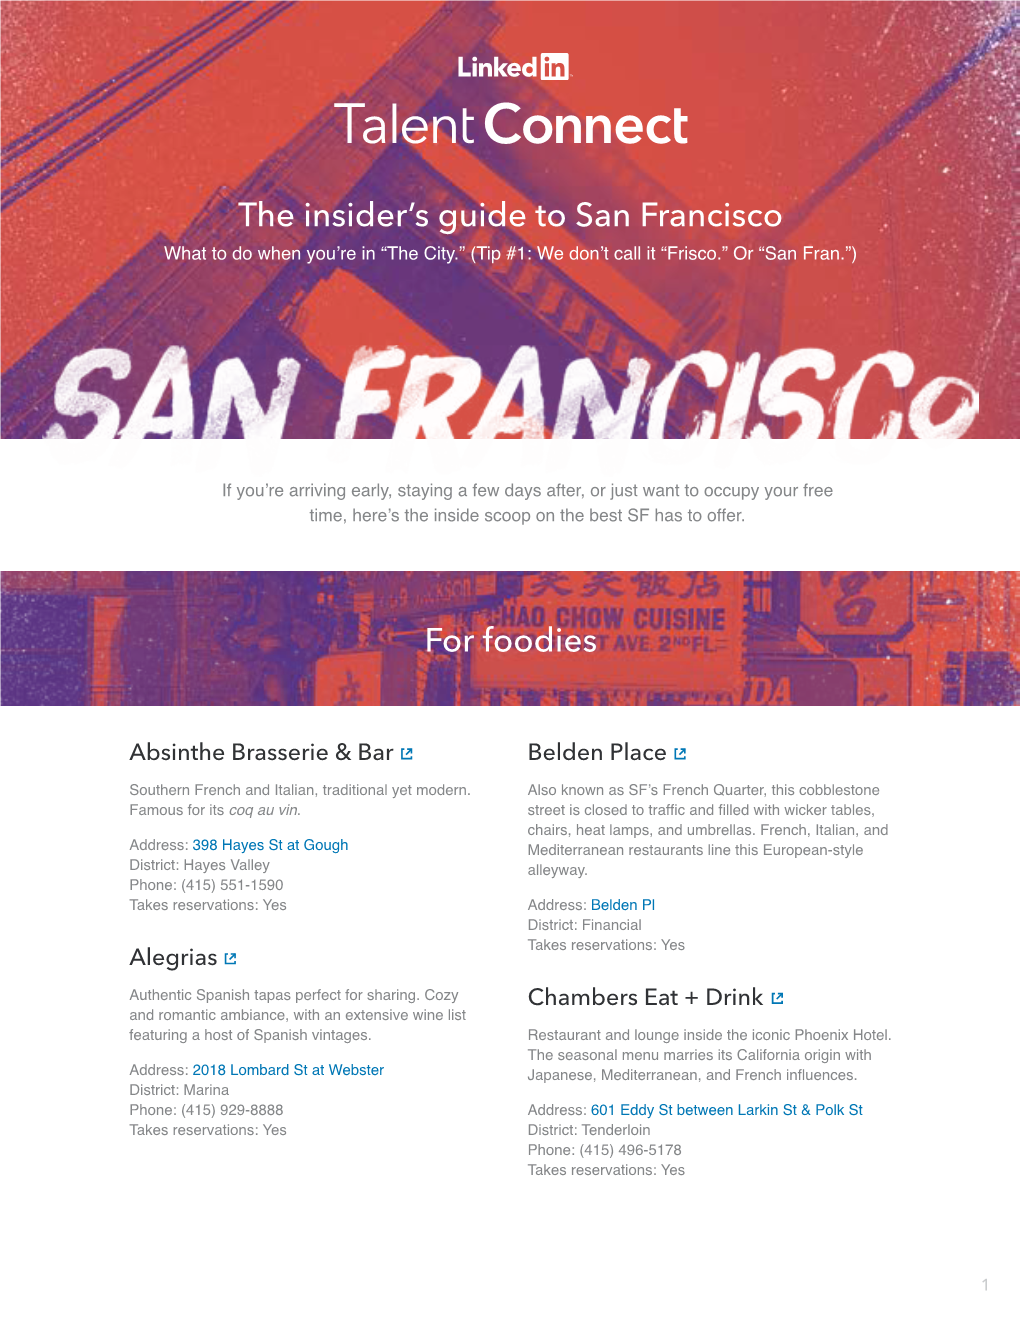 The Insider's Guide to San Francisco for Foodies